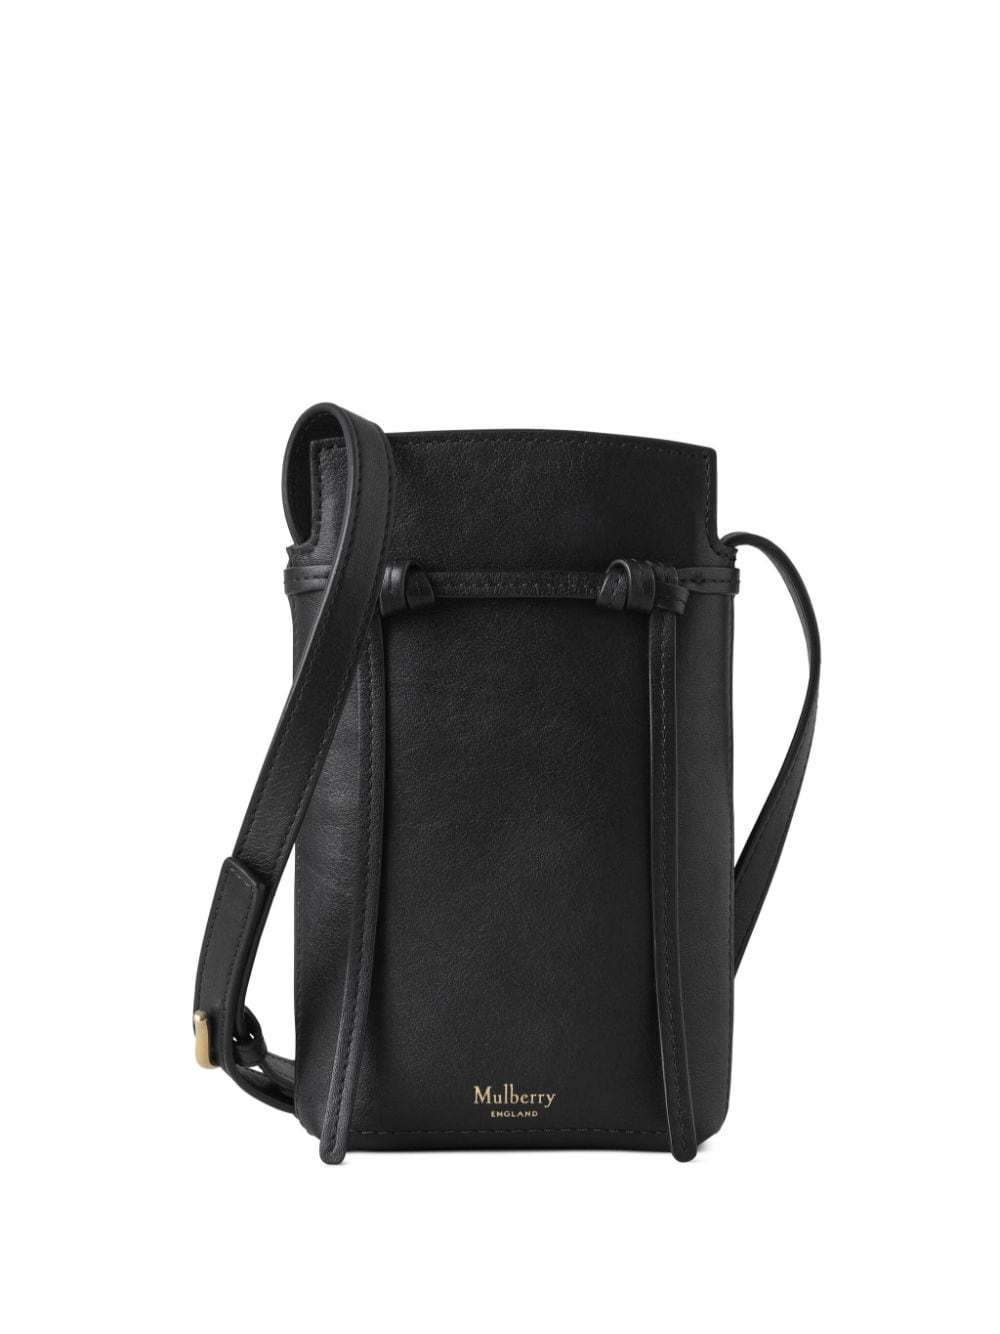 Mulberry Clovelly leather crossbody bag - Black von Mulberry